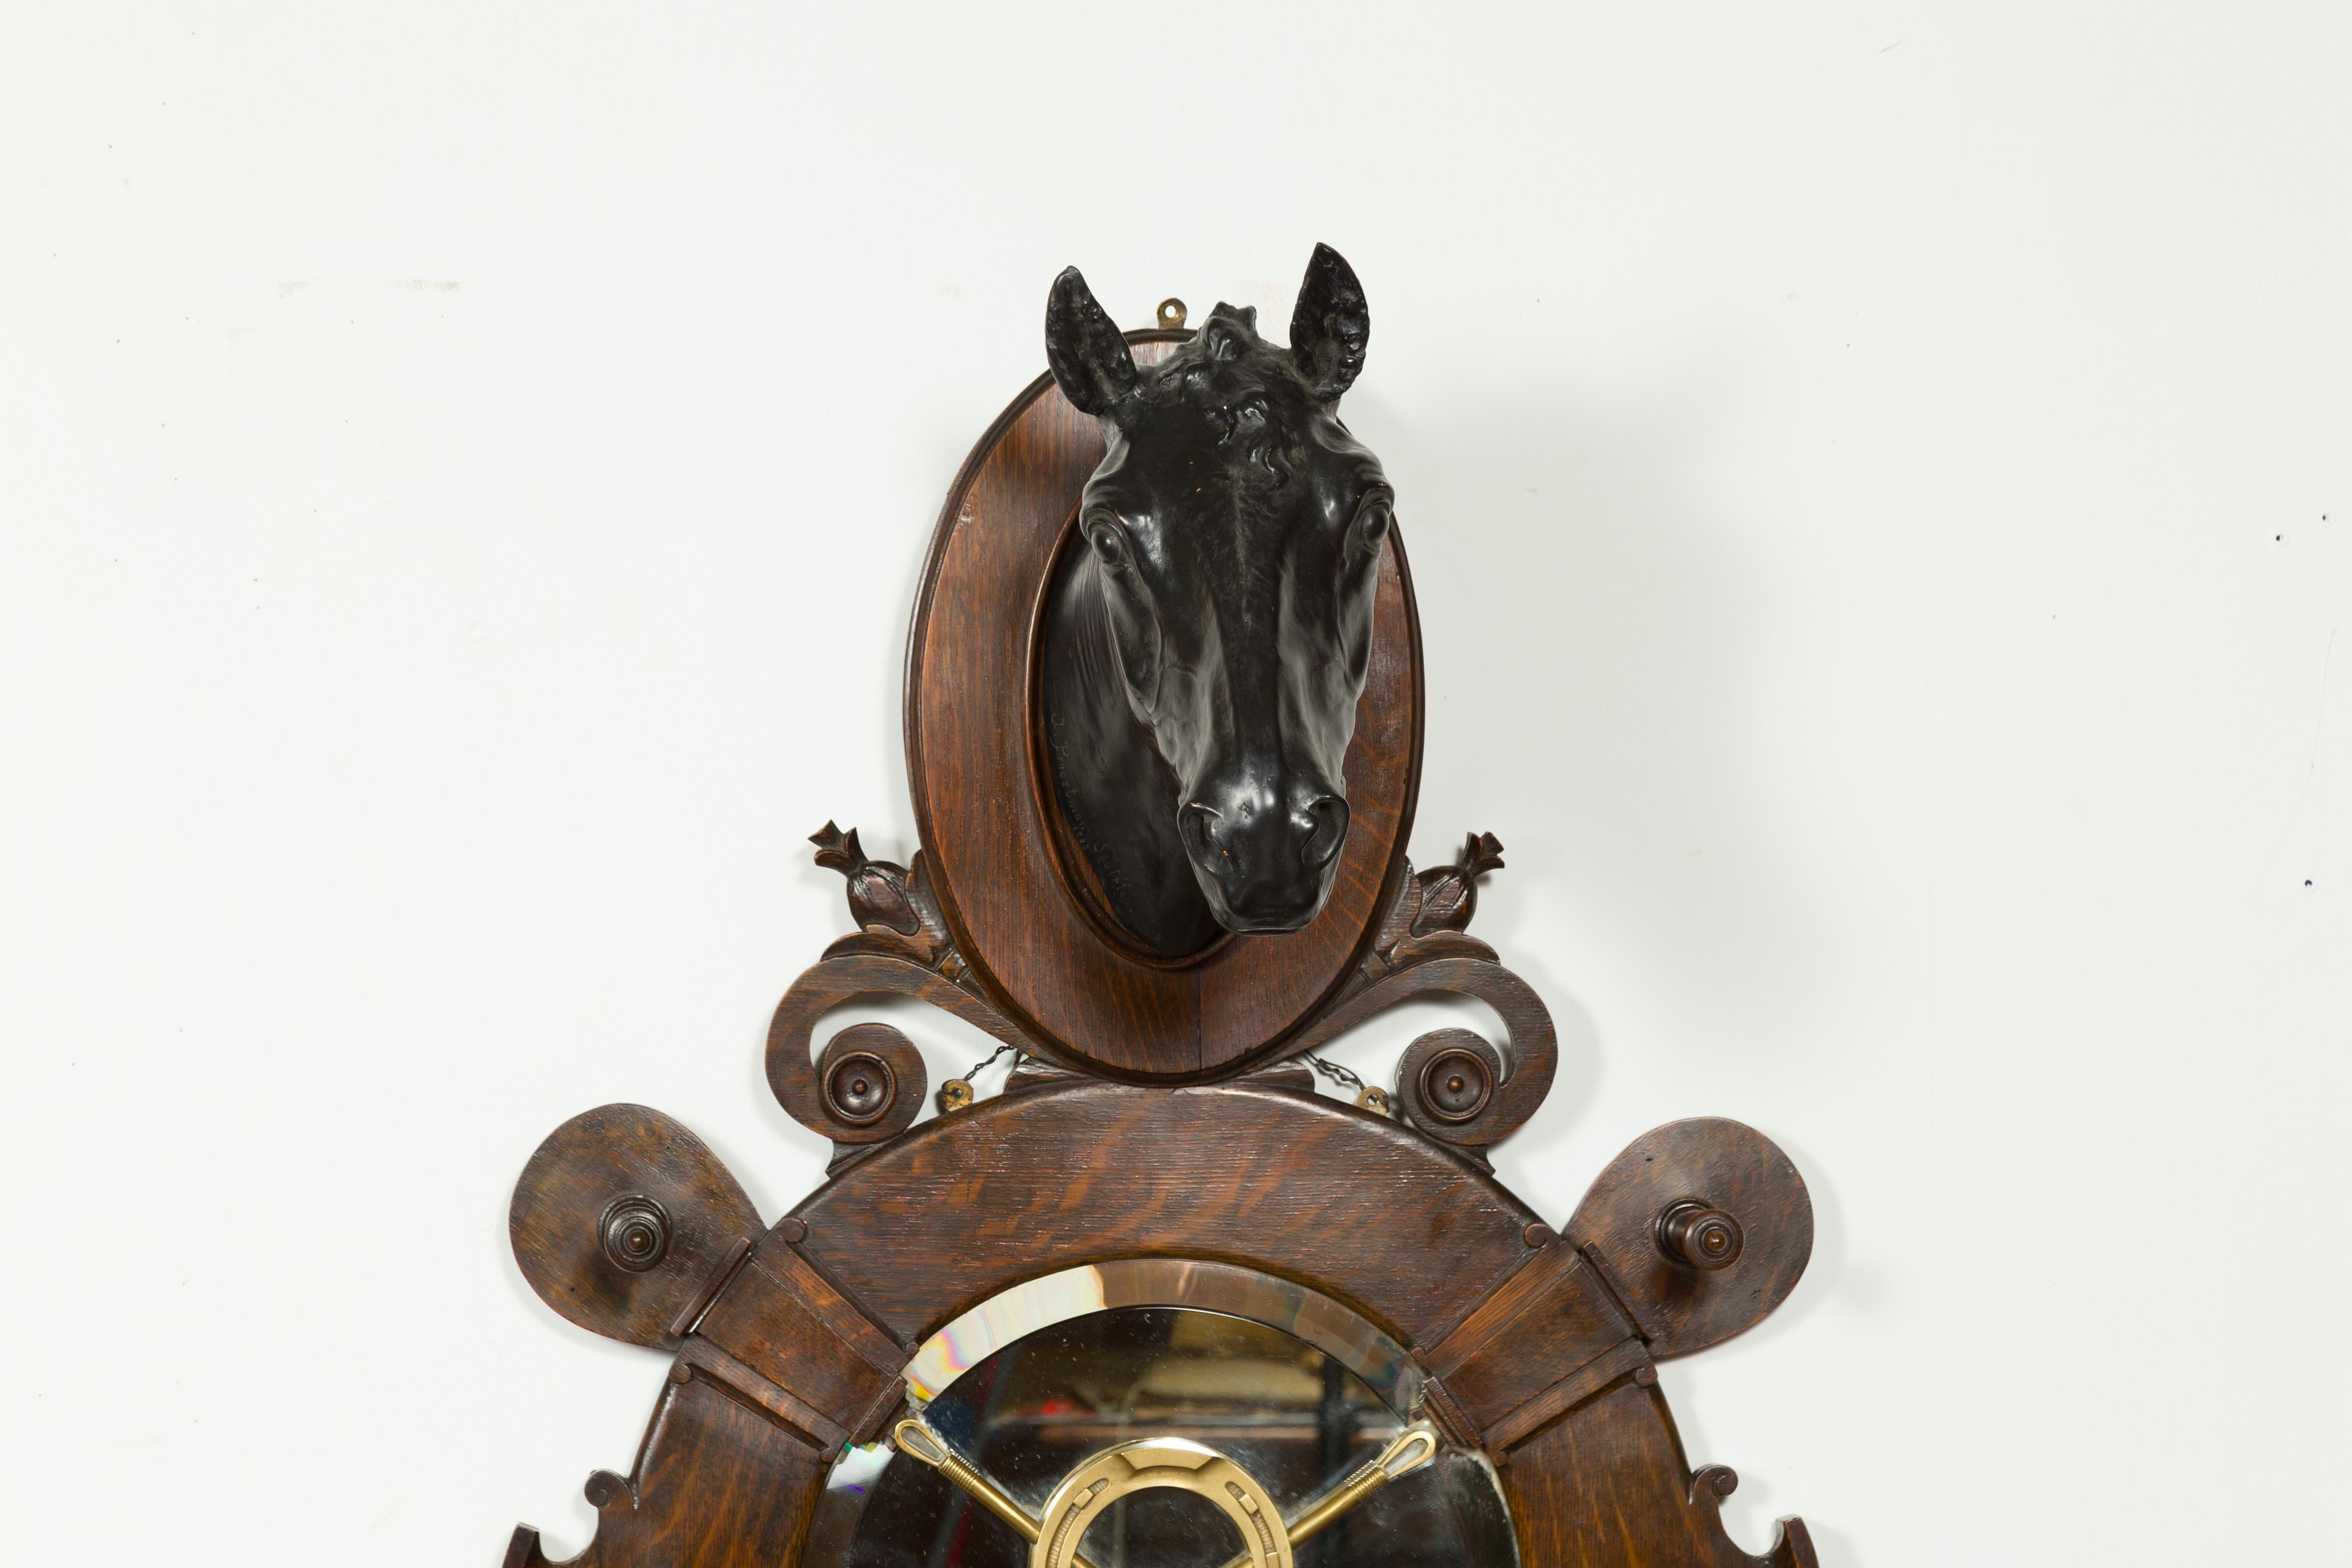 An English wall hanging terracotta and oak horse with bronze accents, signed J. Priestman Sculptor circa 1903 and titled The Count. Created in the early years of the 20th century, this wall hanging fixture features a black terracotta horse head on